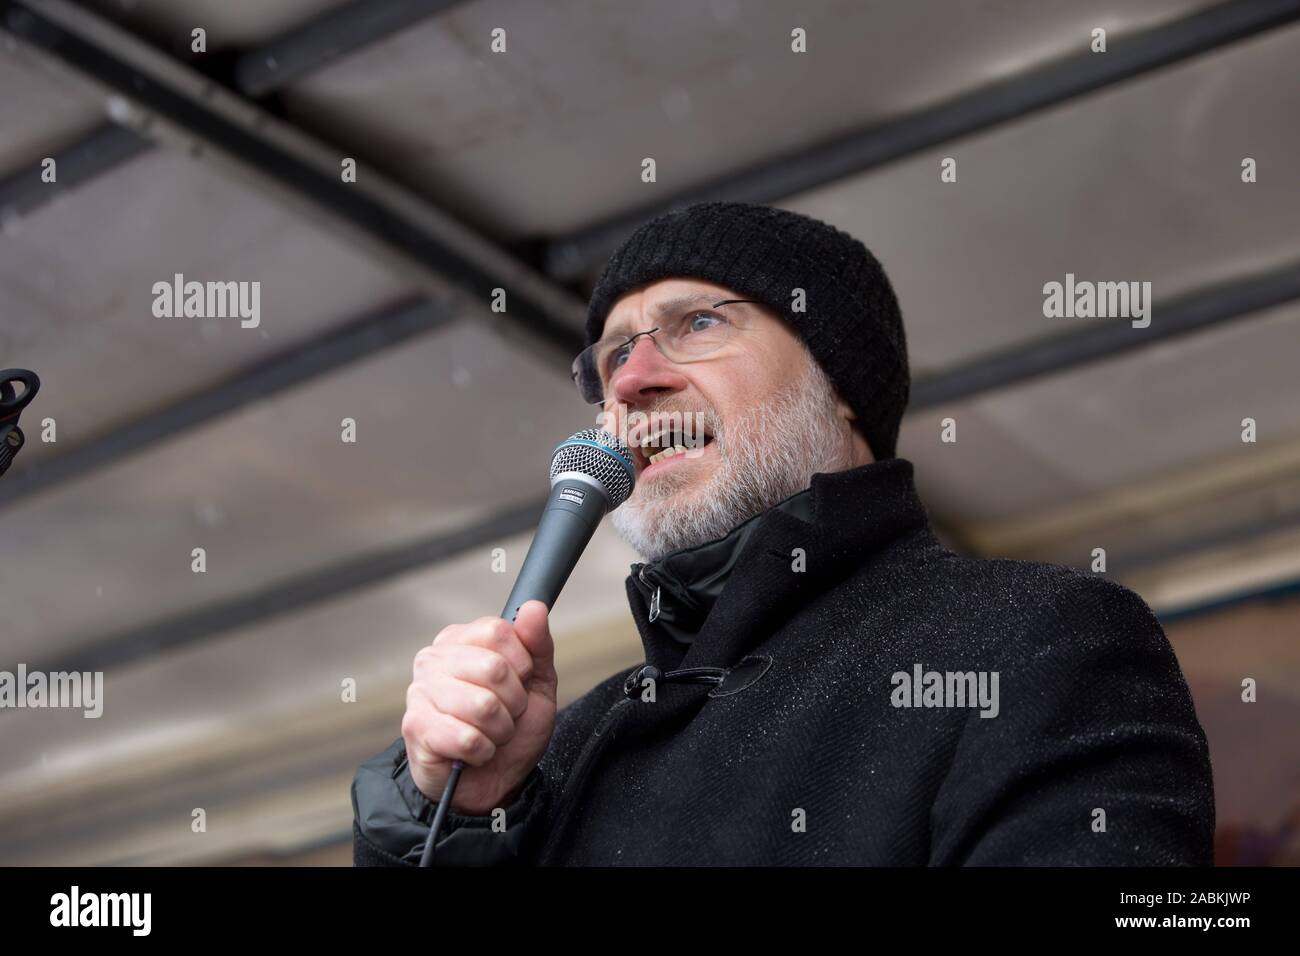 Guest speaker Harald Lesch speaks at a rally of the pro-European citizens' movement 'Pulse of Europe' at the Max-Joseph-Platz in Munich. [automated translation] Stock Photo